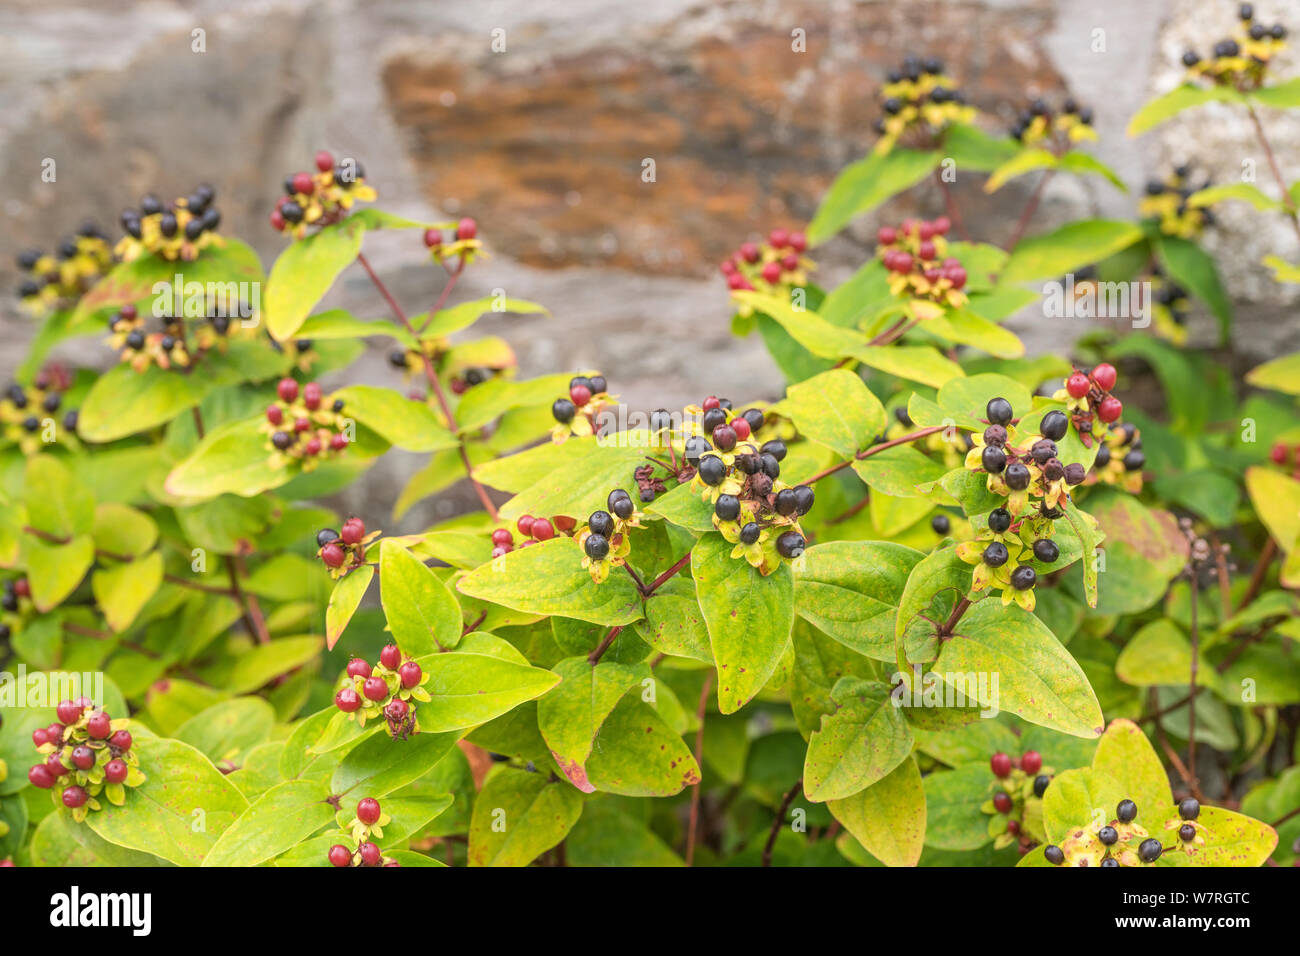 Leaves and black berries of Tutsan / Hypericum androsaemum. Tutsan was used as a medicinal herbal wound plant, and is related to St. John's Wort. Stock Photo